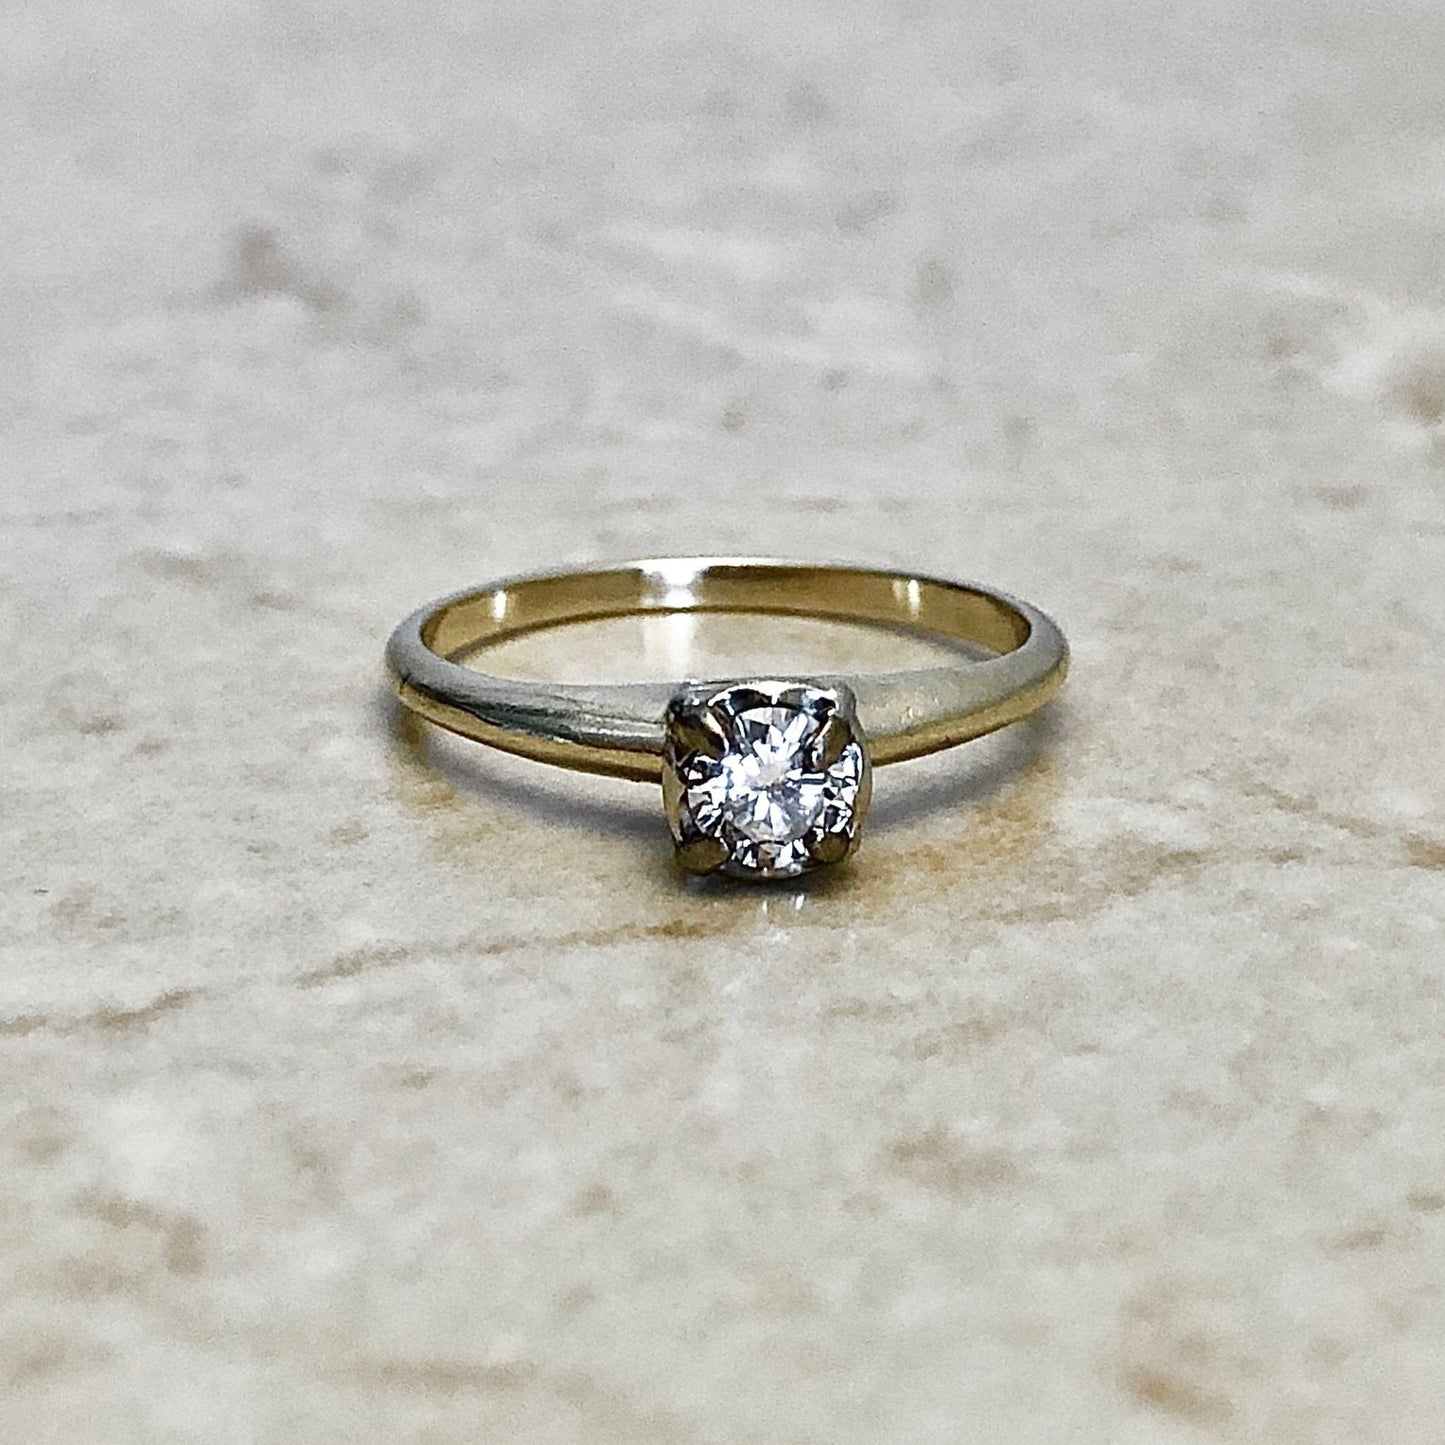 14K Vintage Diamond Solitaire Ring - Two Tone Gold Diamond Engagement Ring - Promise Ring - Anniversary Ring- Bridal Ring - Wedding Ring